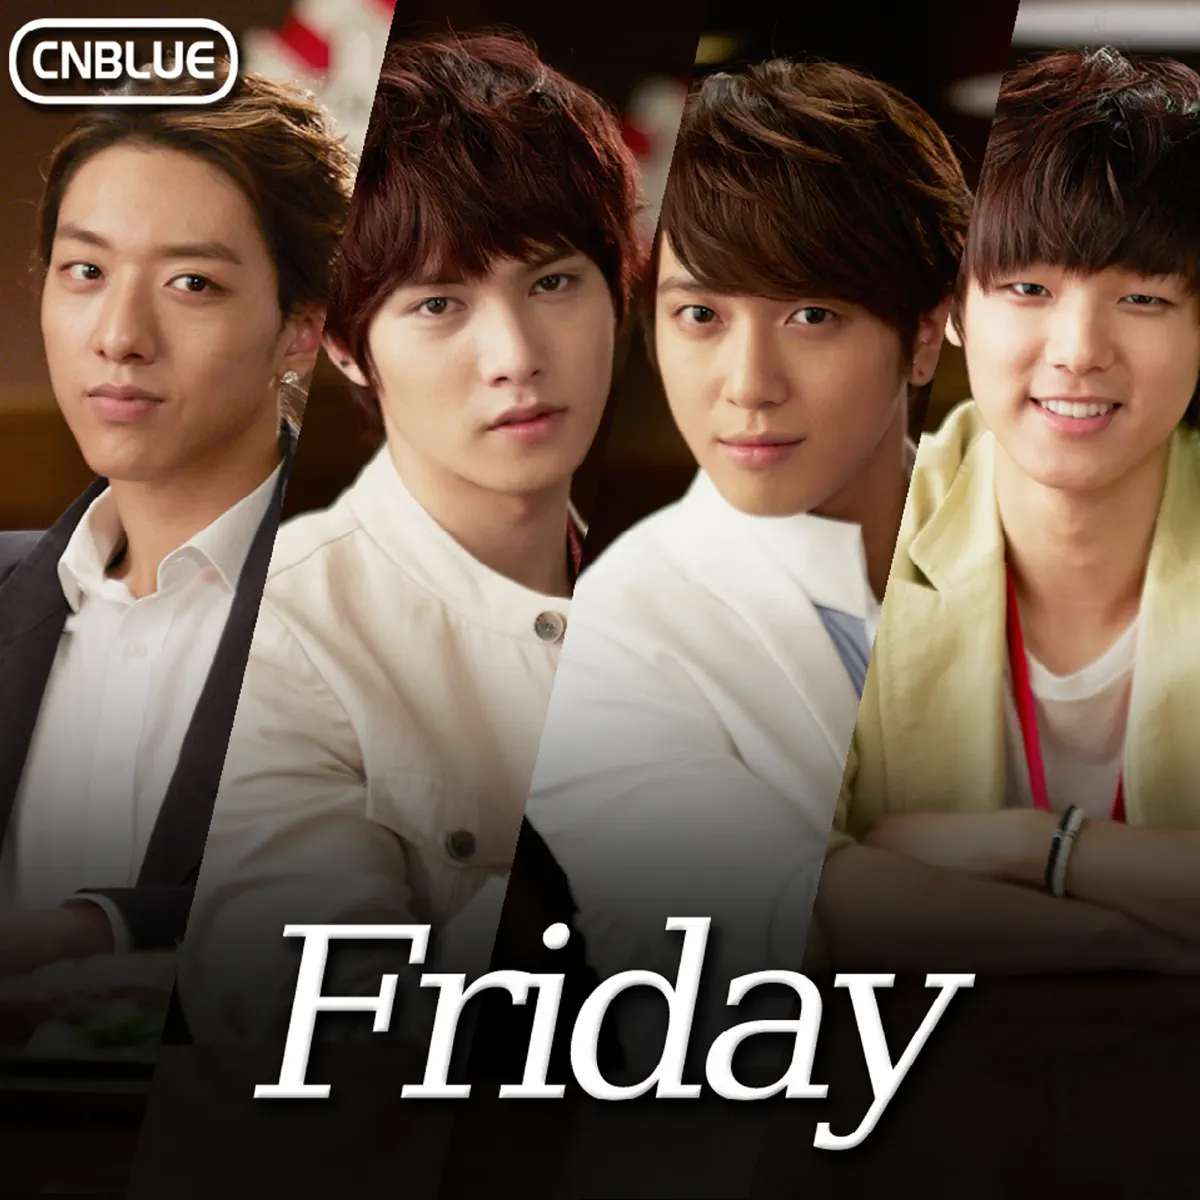 CNBLUE - Friday - Single (2012) [iTunes Plus AAC M4A]-新房子